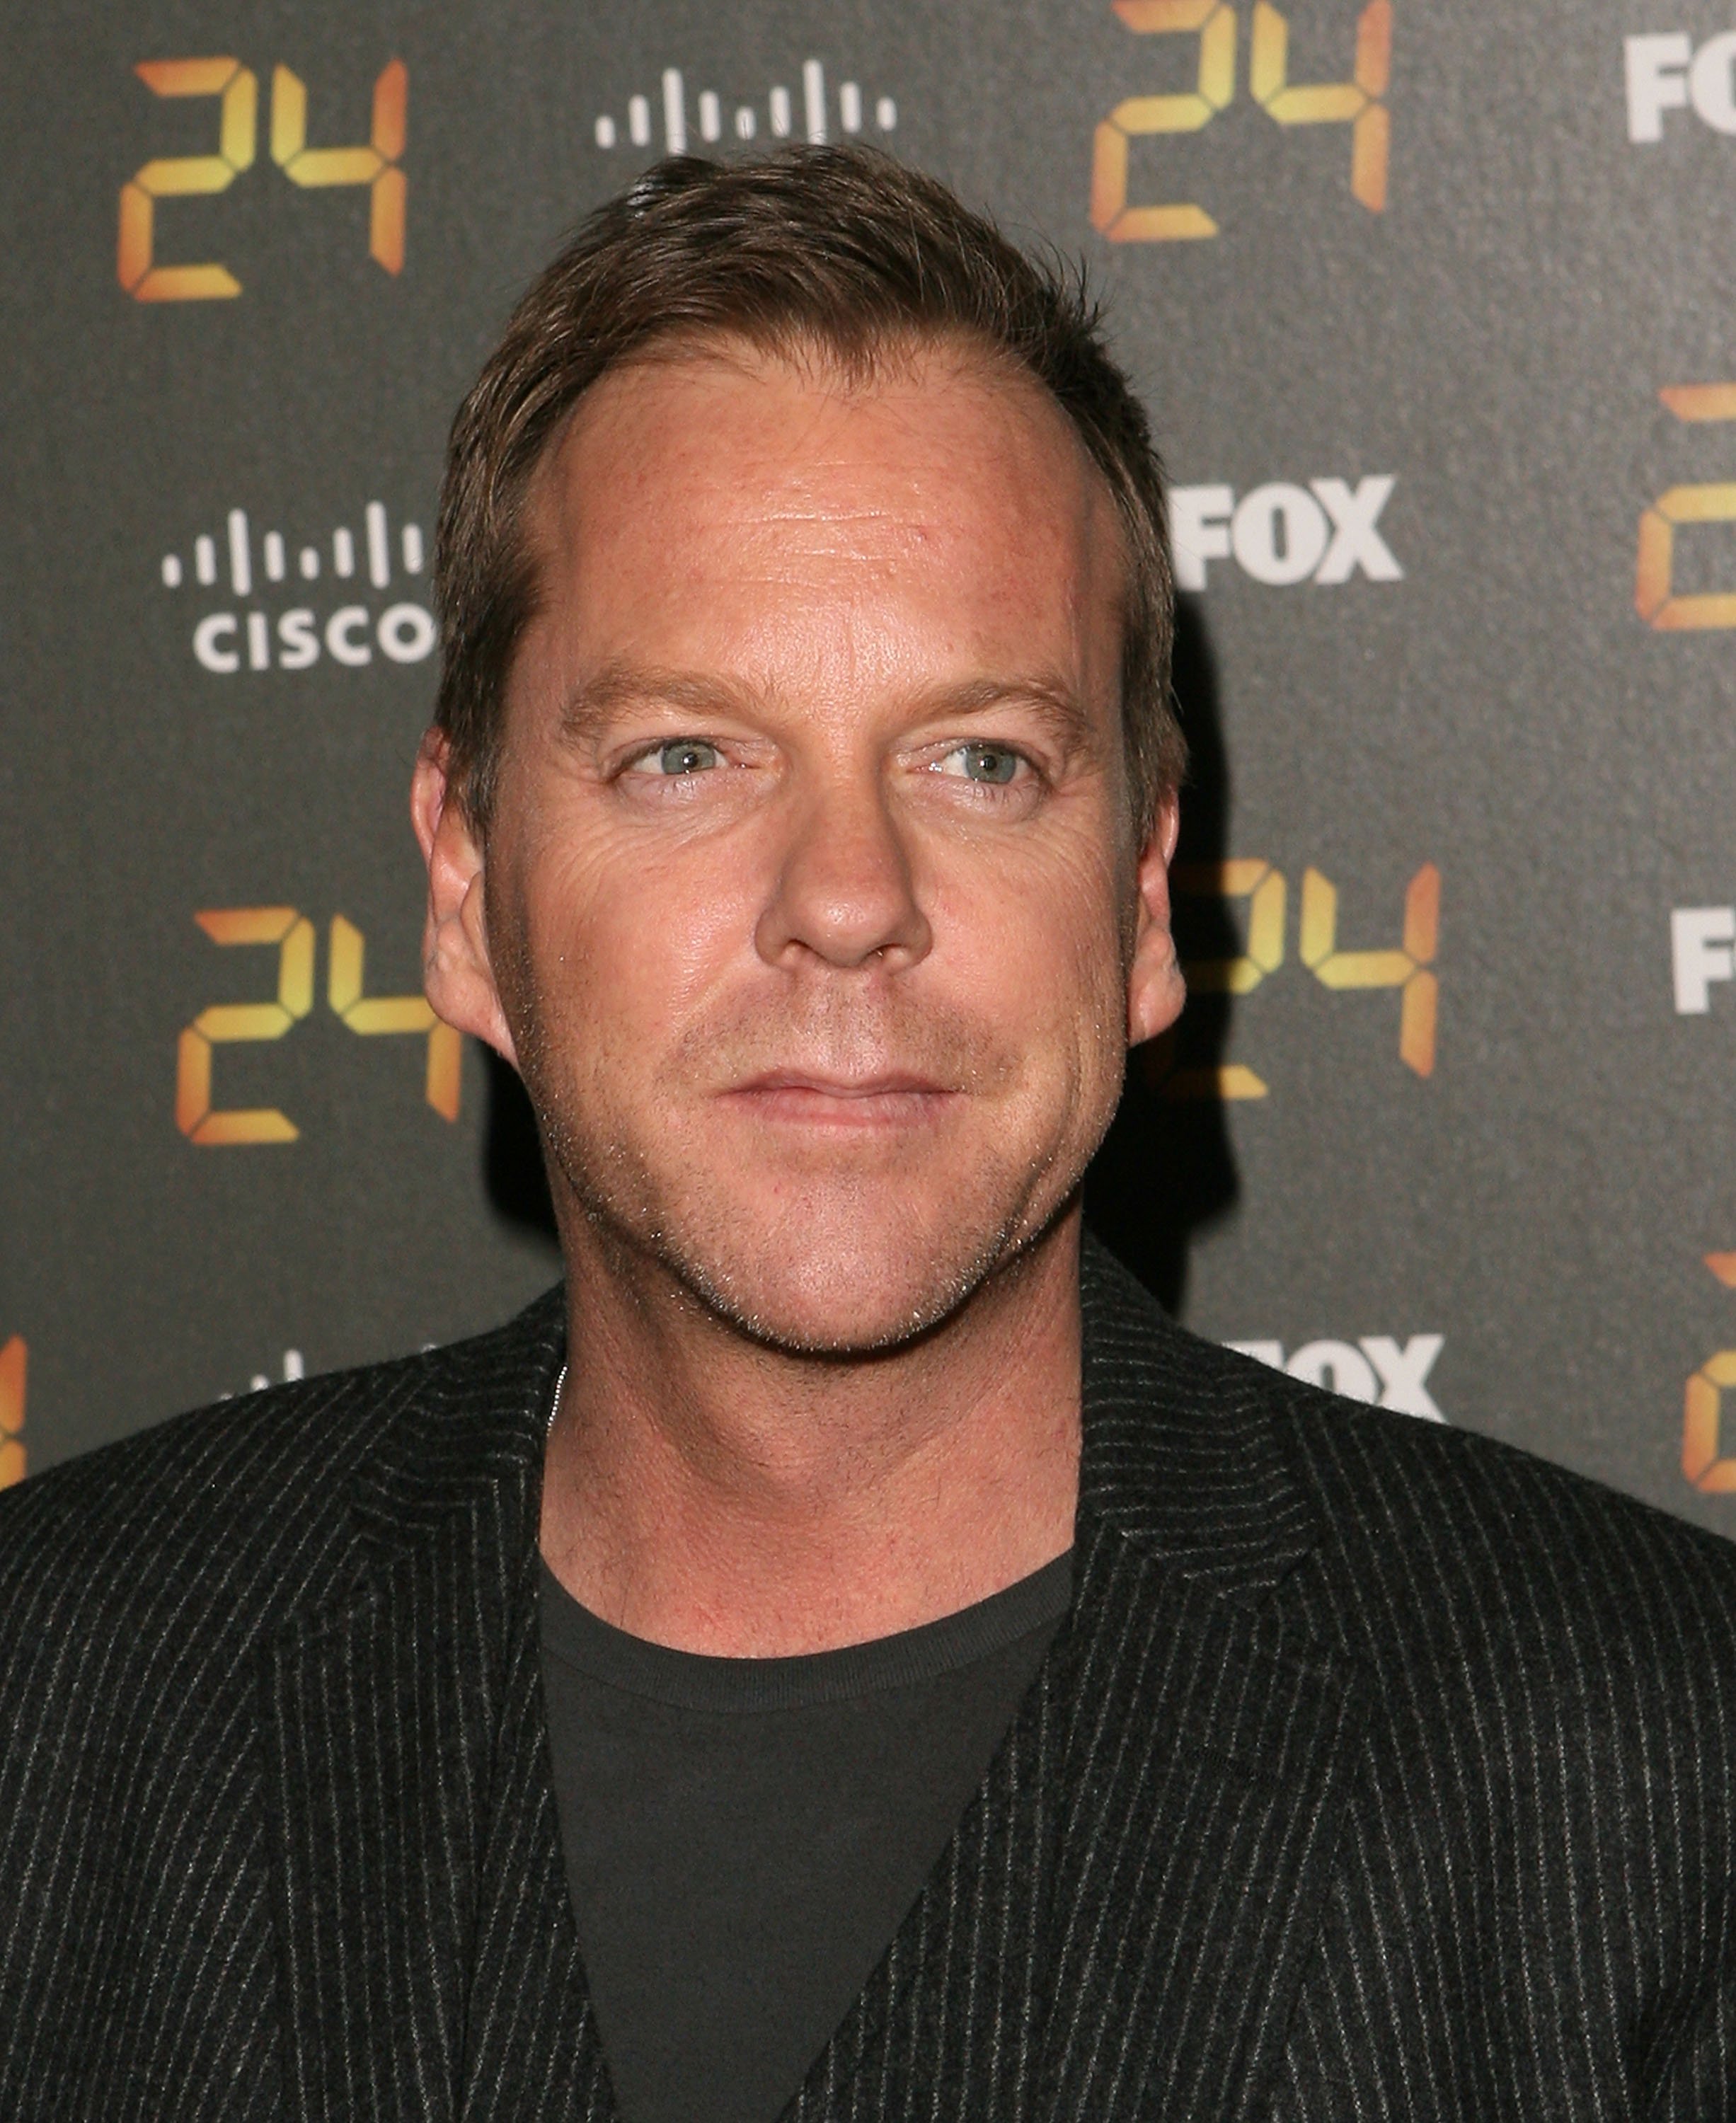 Actor Kiefer Sutherland arrives at the "24" 150th Episode and Season 7 Premiere Party